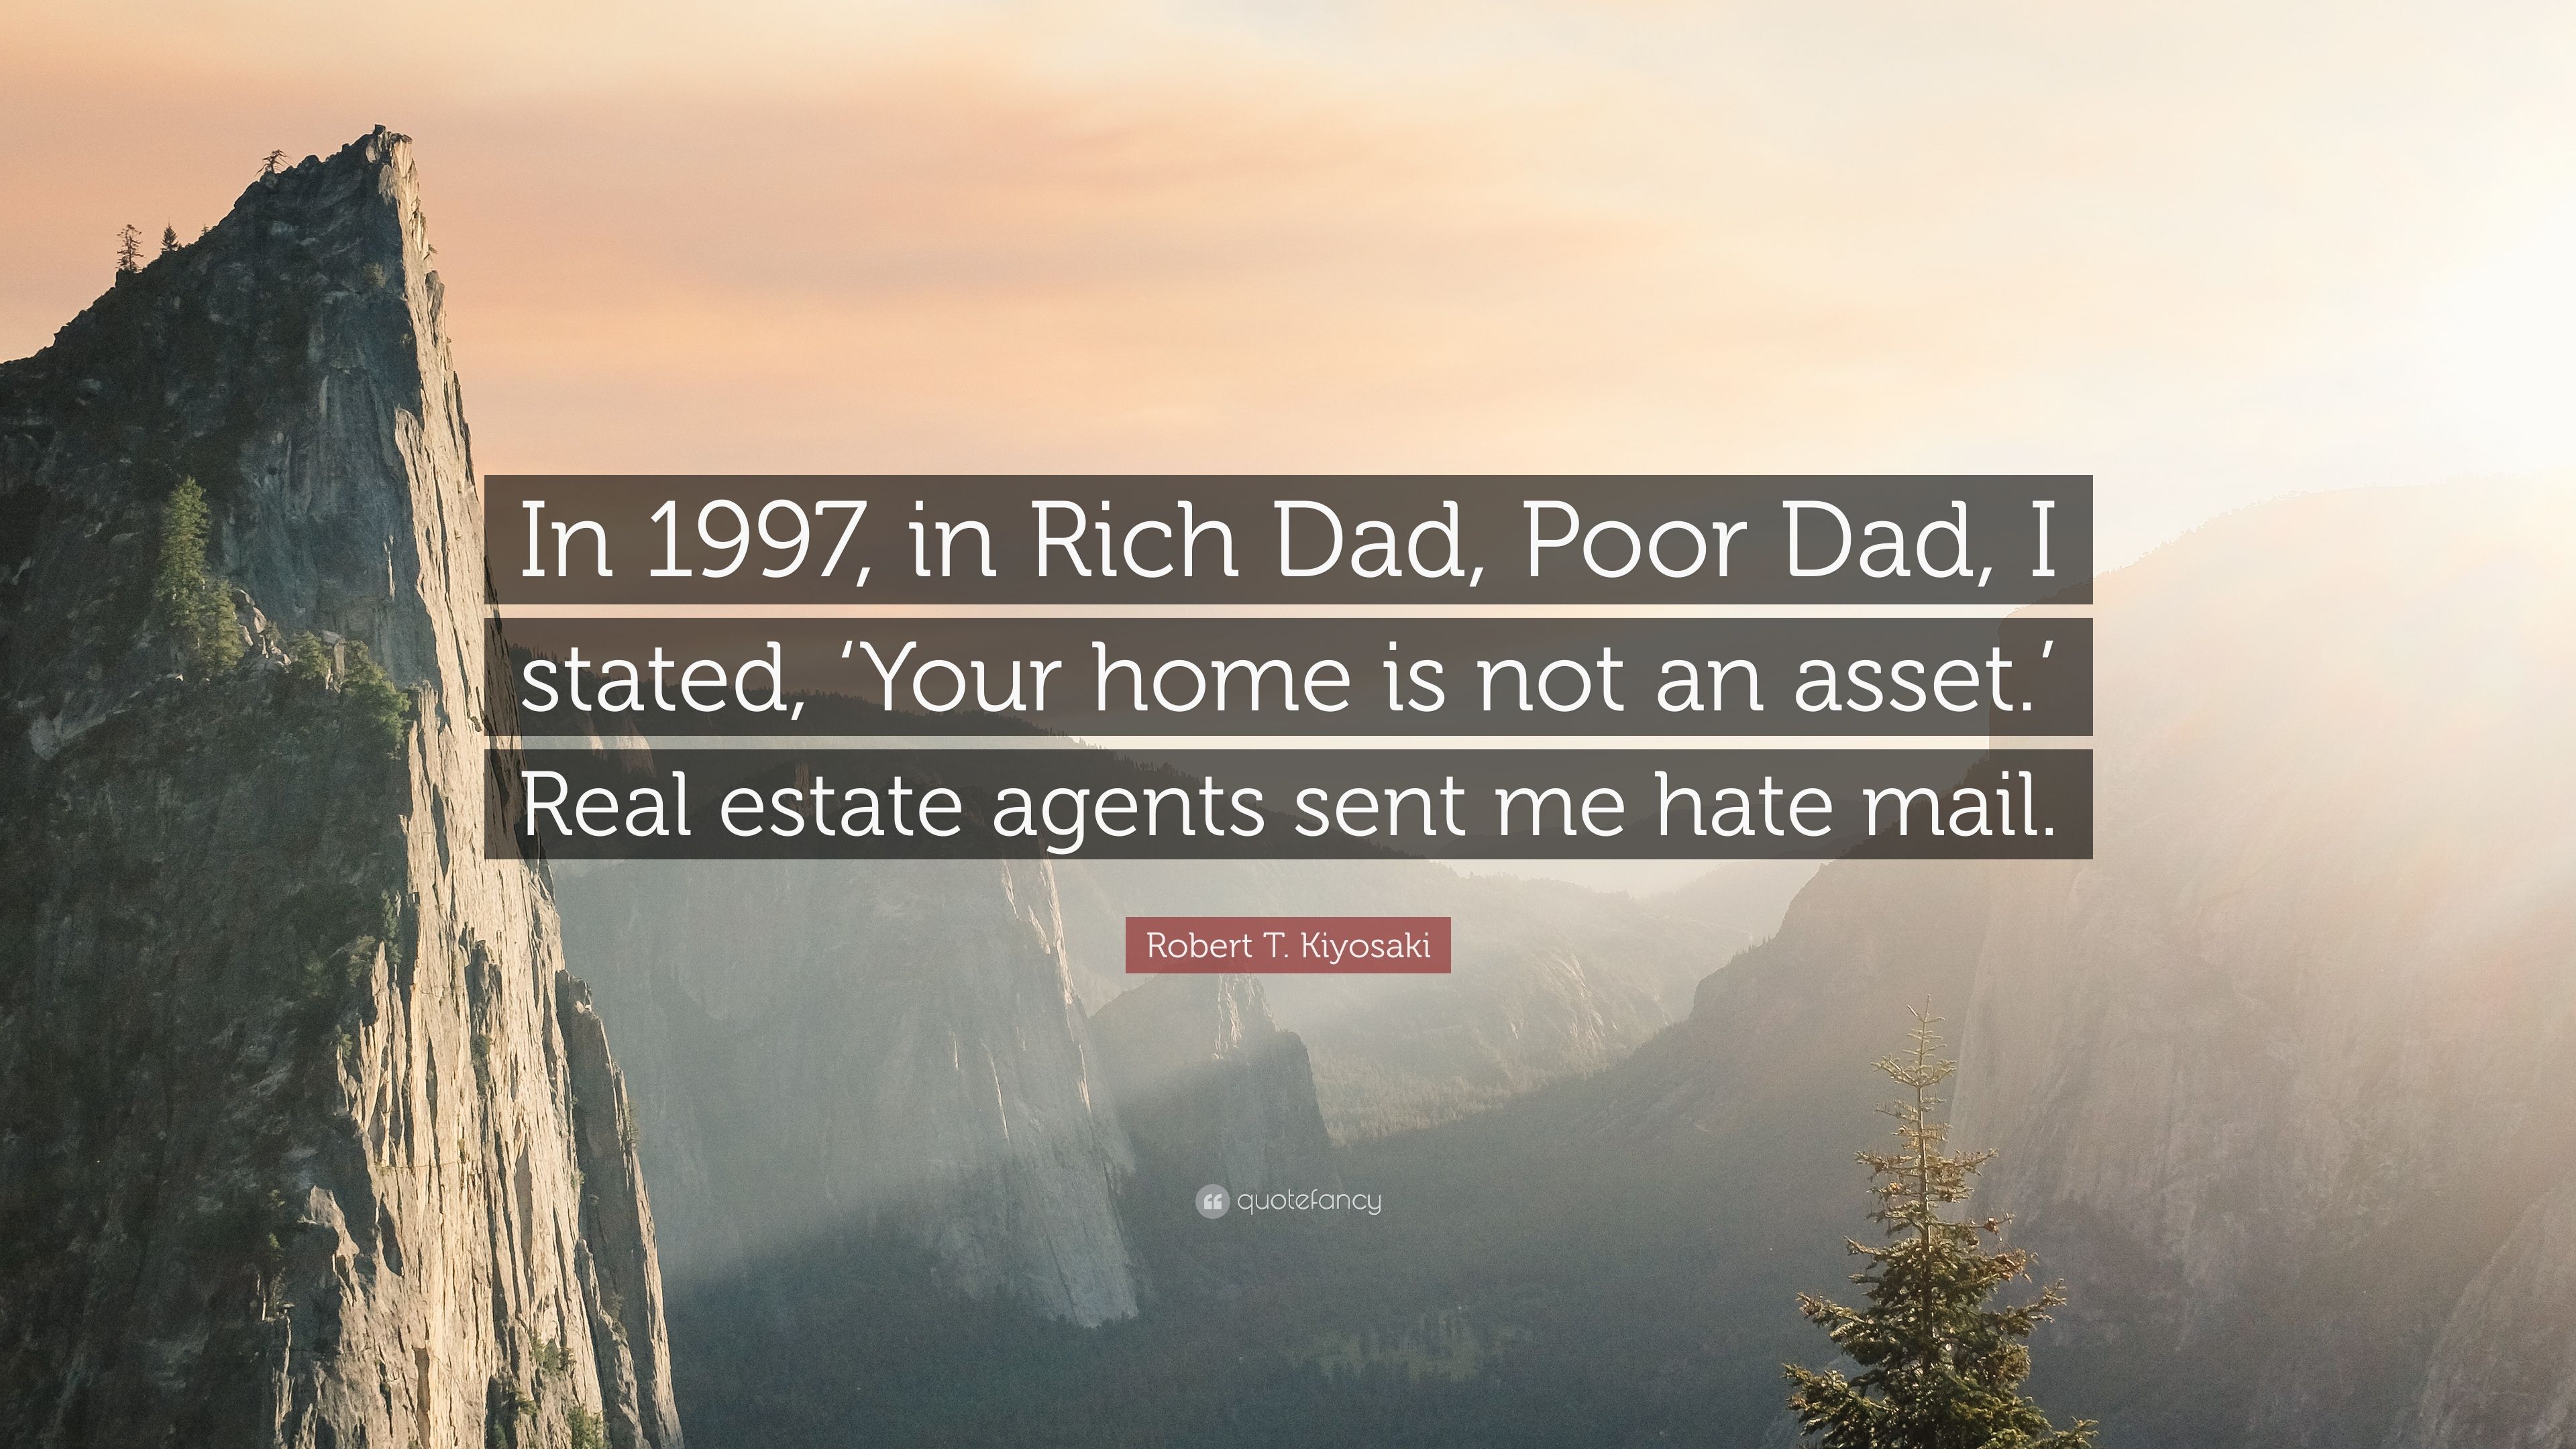 Robert T. Kiyosaki Quote: “In in Rich Dad, Poor Dad, I stated, 'Your home is not an asset.' Real estate agents sent me hate mail.” (12 wallpaper)